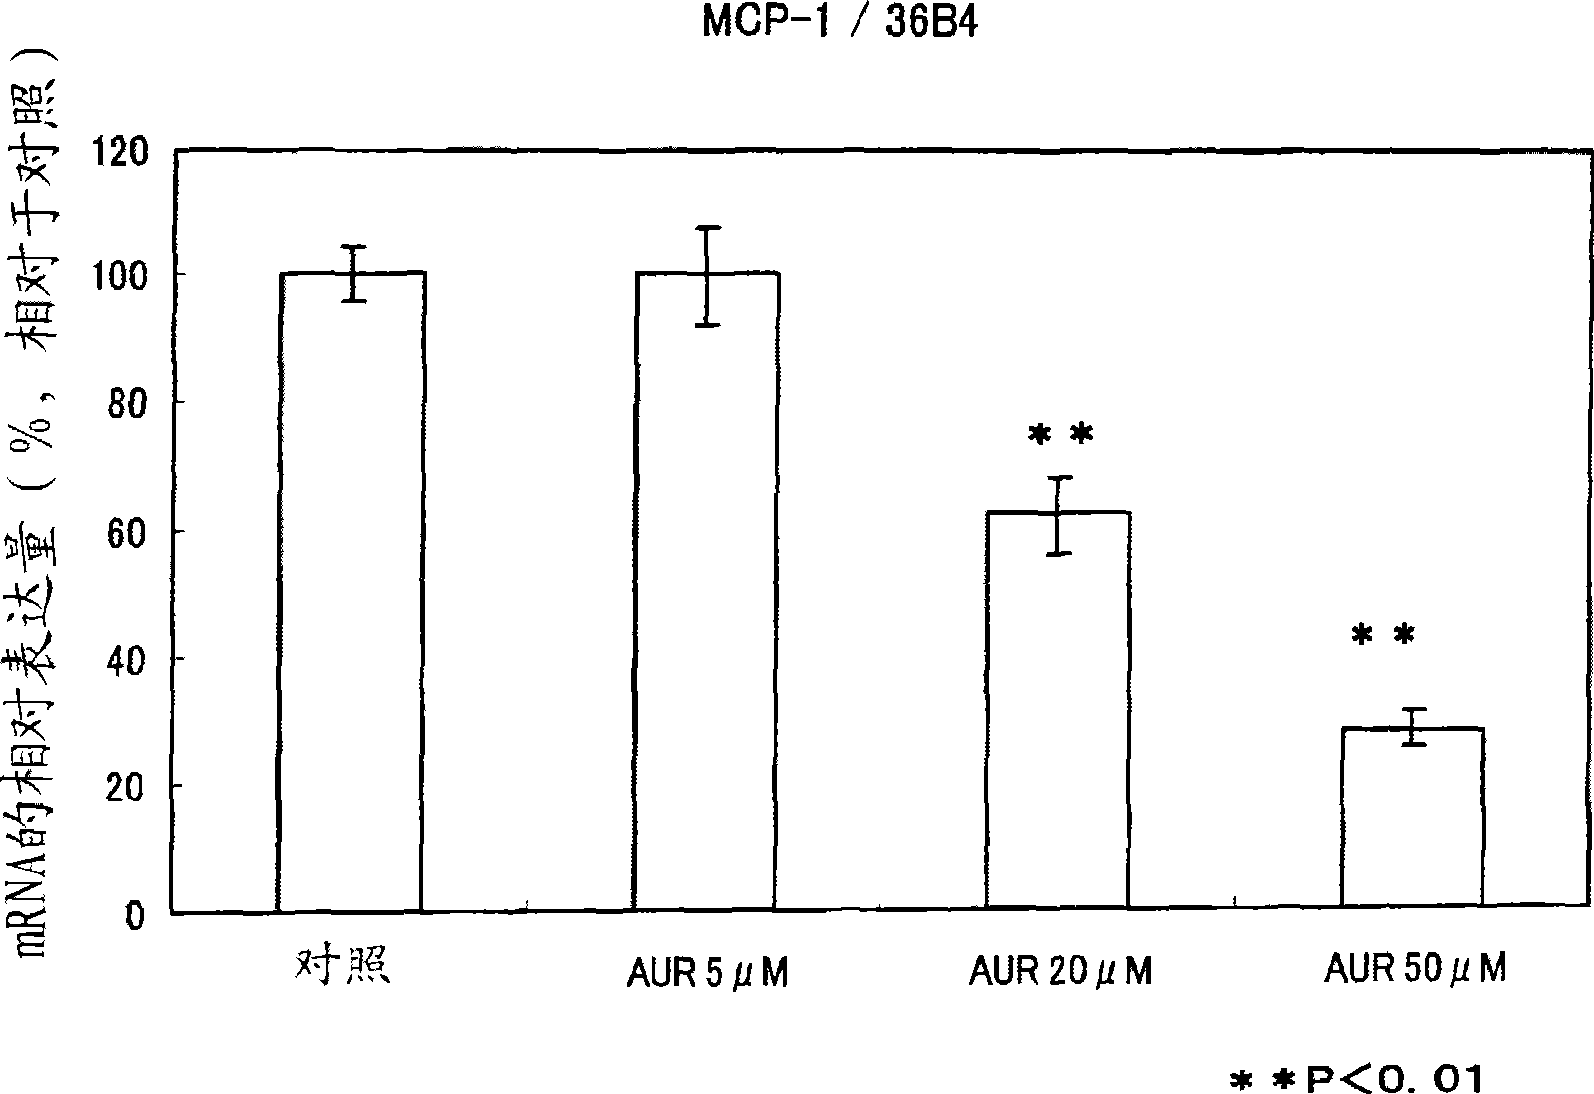 Suppressor of expression of MCP-1, and ameliorating agent for inflammatory disease, pharmaceutical, supplement, food, beverage or food additive using the suppressor